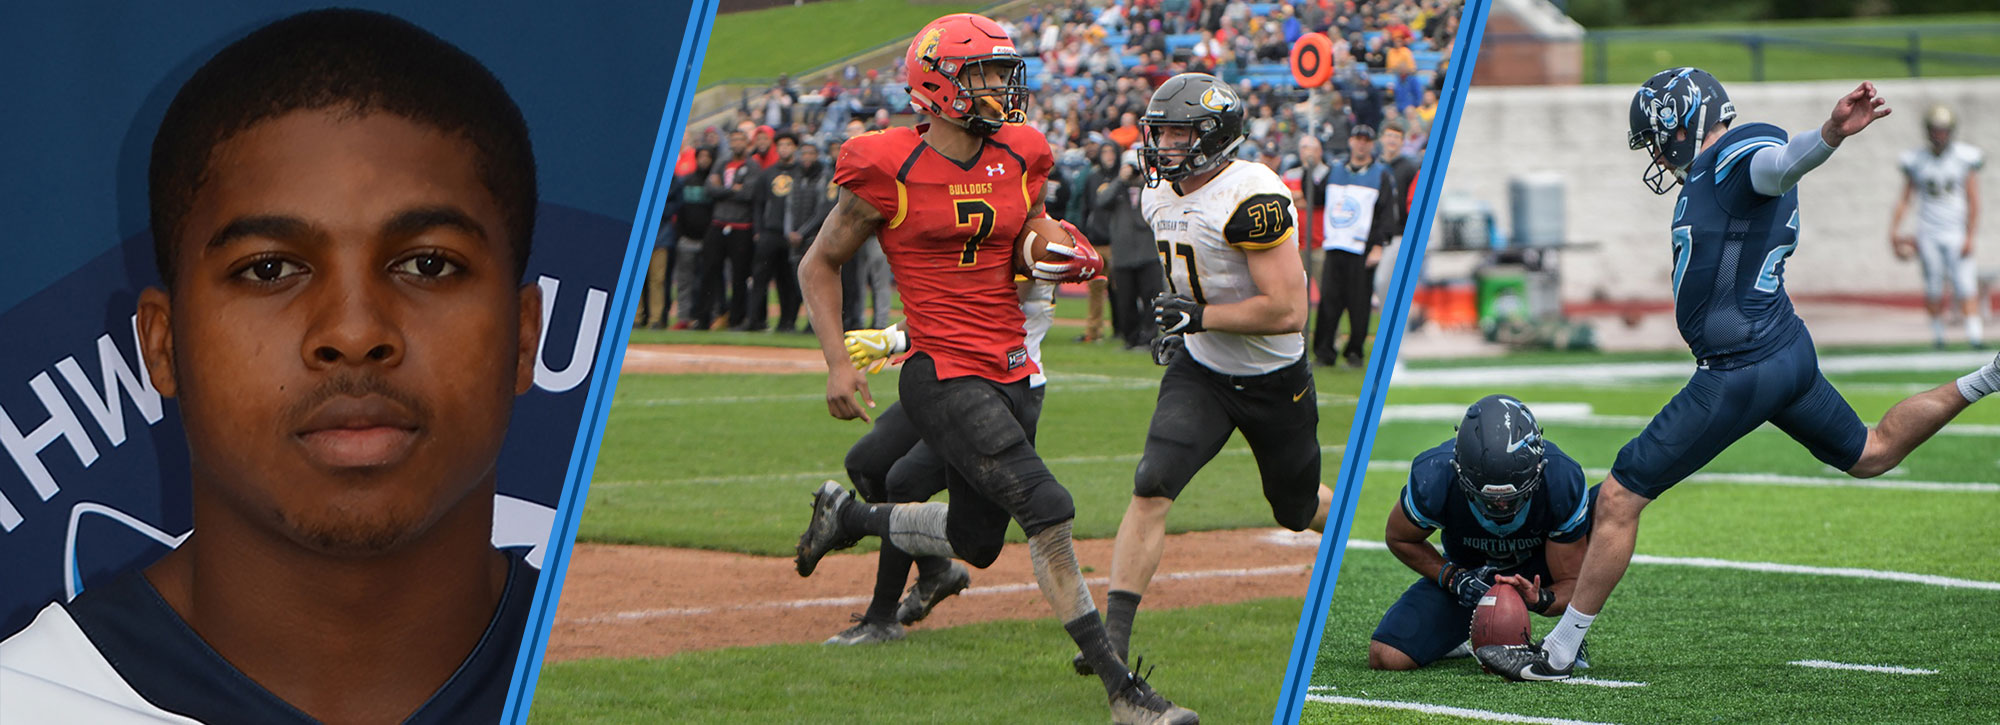 Ferris State's Campbell, Northwood's Williamson & Riser Collect GLIAC Football Player of the Week Honors